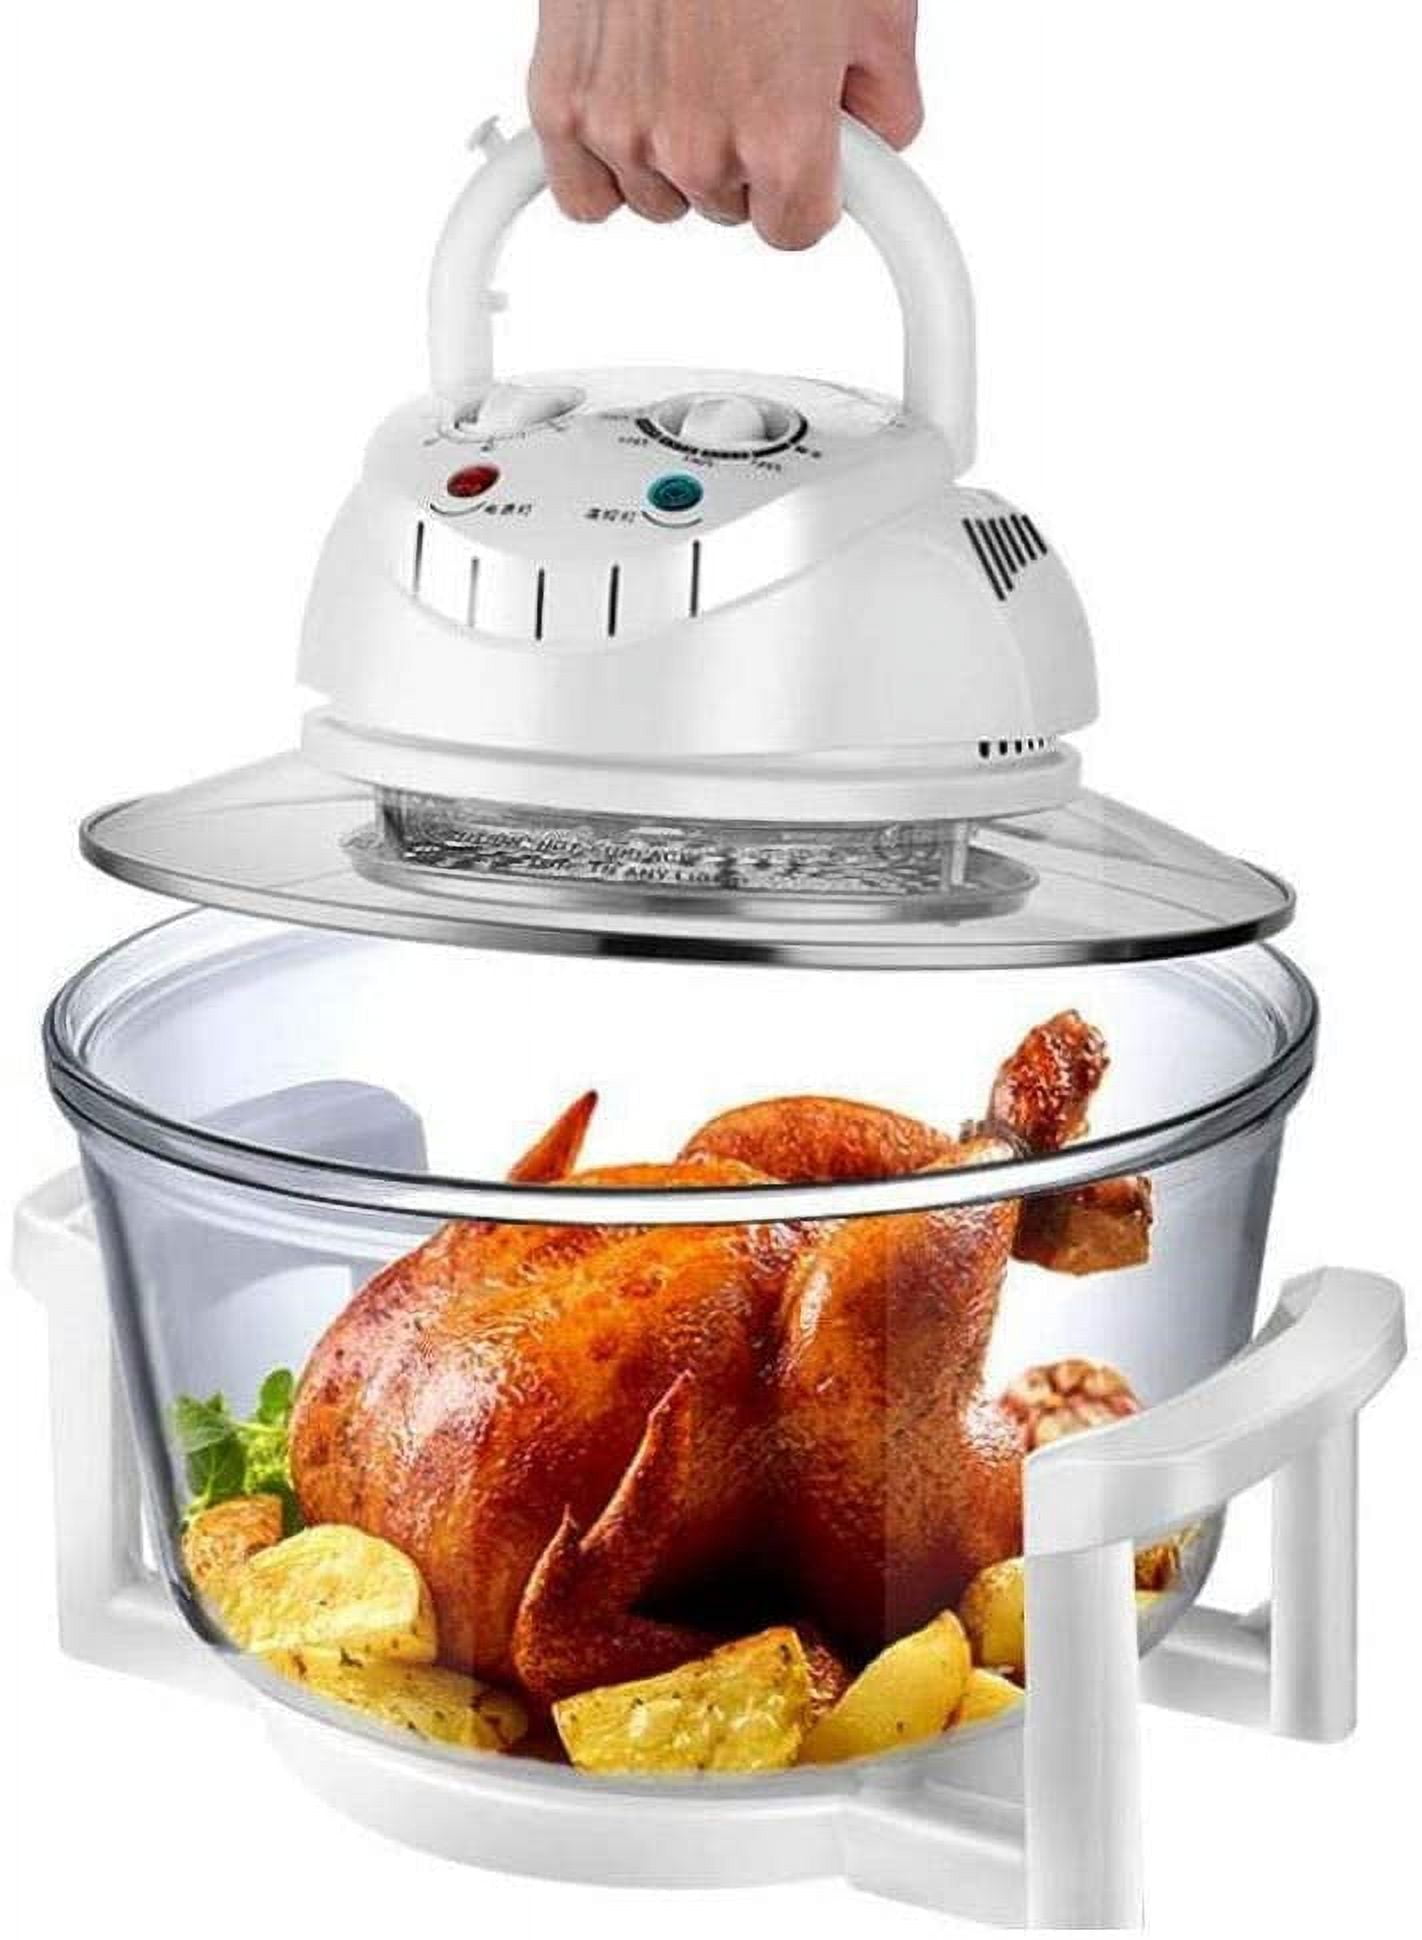 Rotisserie Chicken Cooking Demo ~ Comfee Toaster Oven Air Fryer